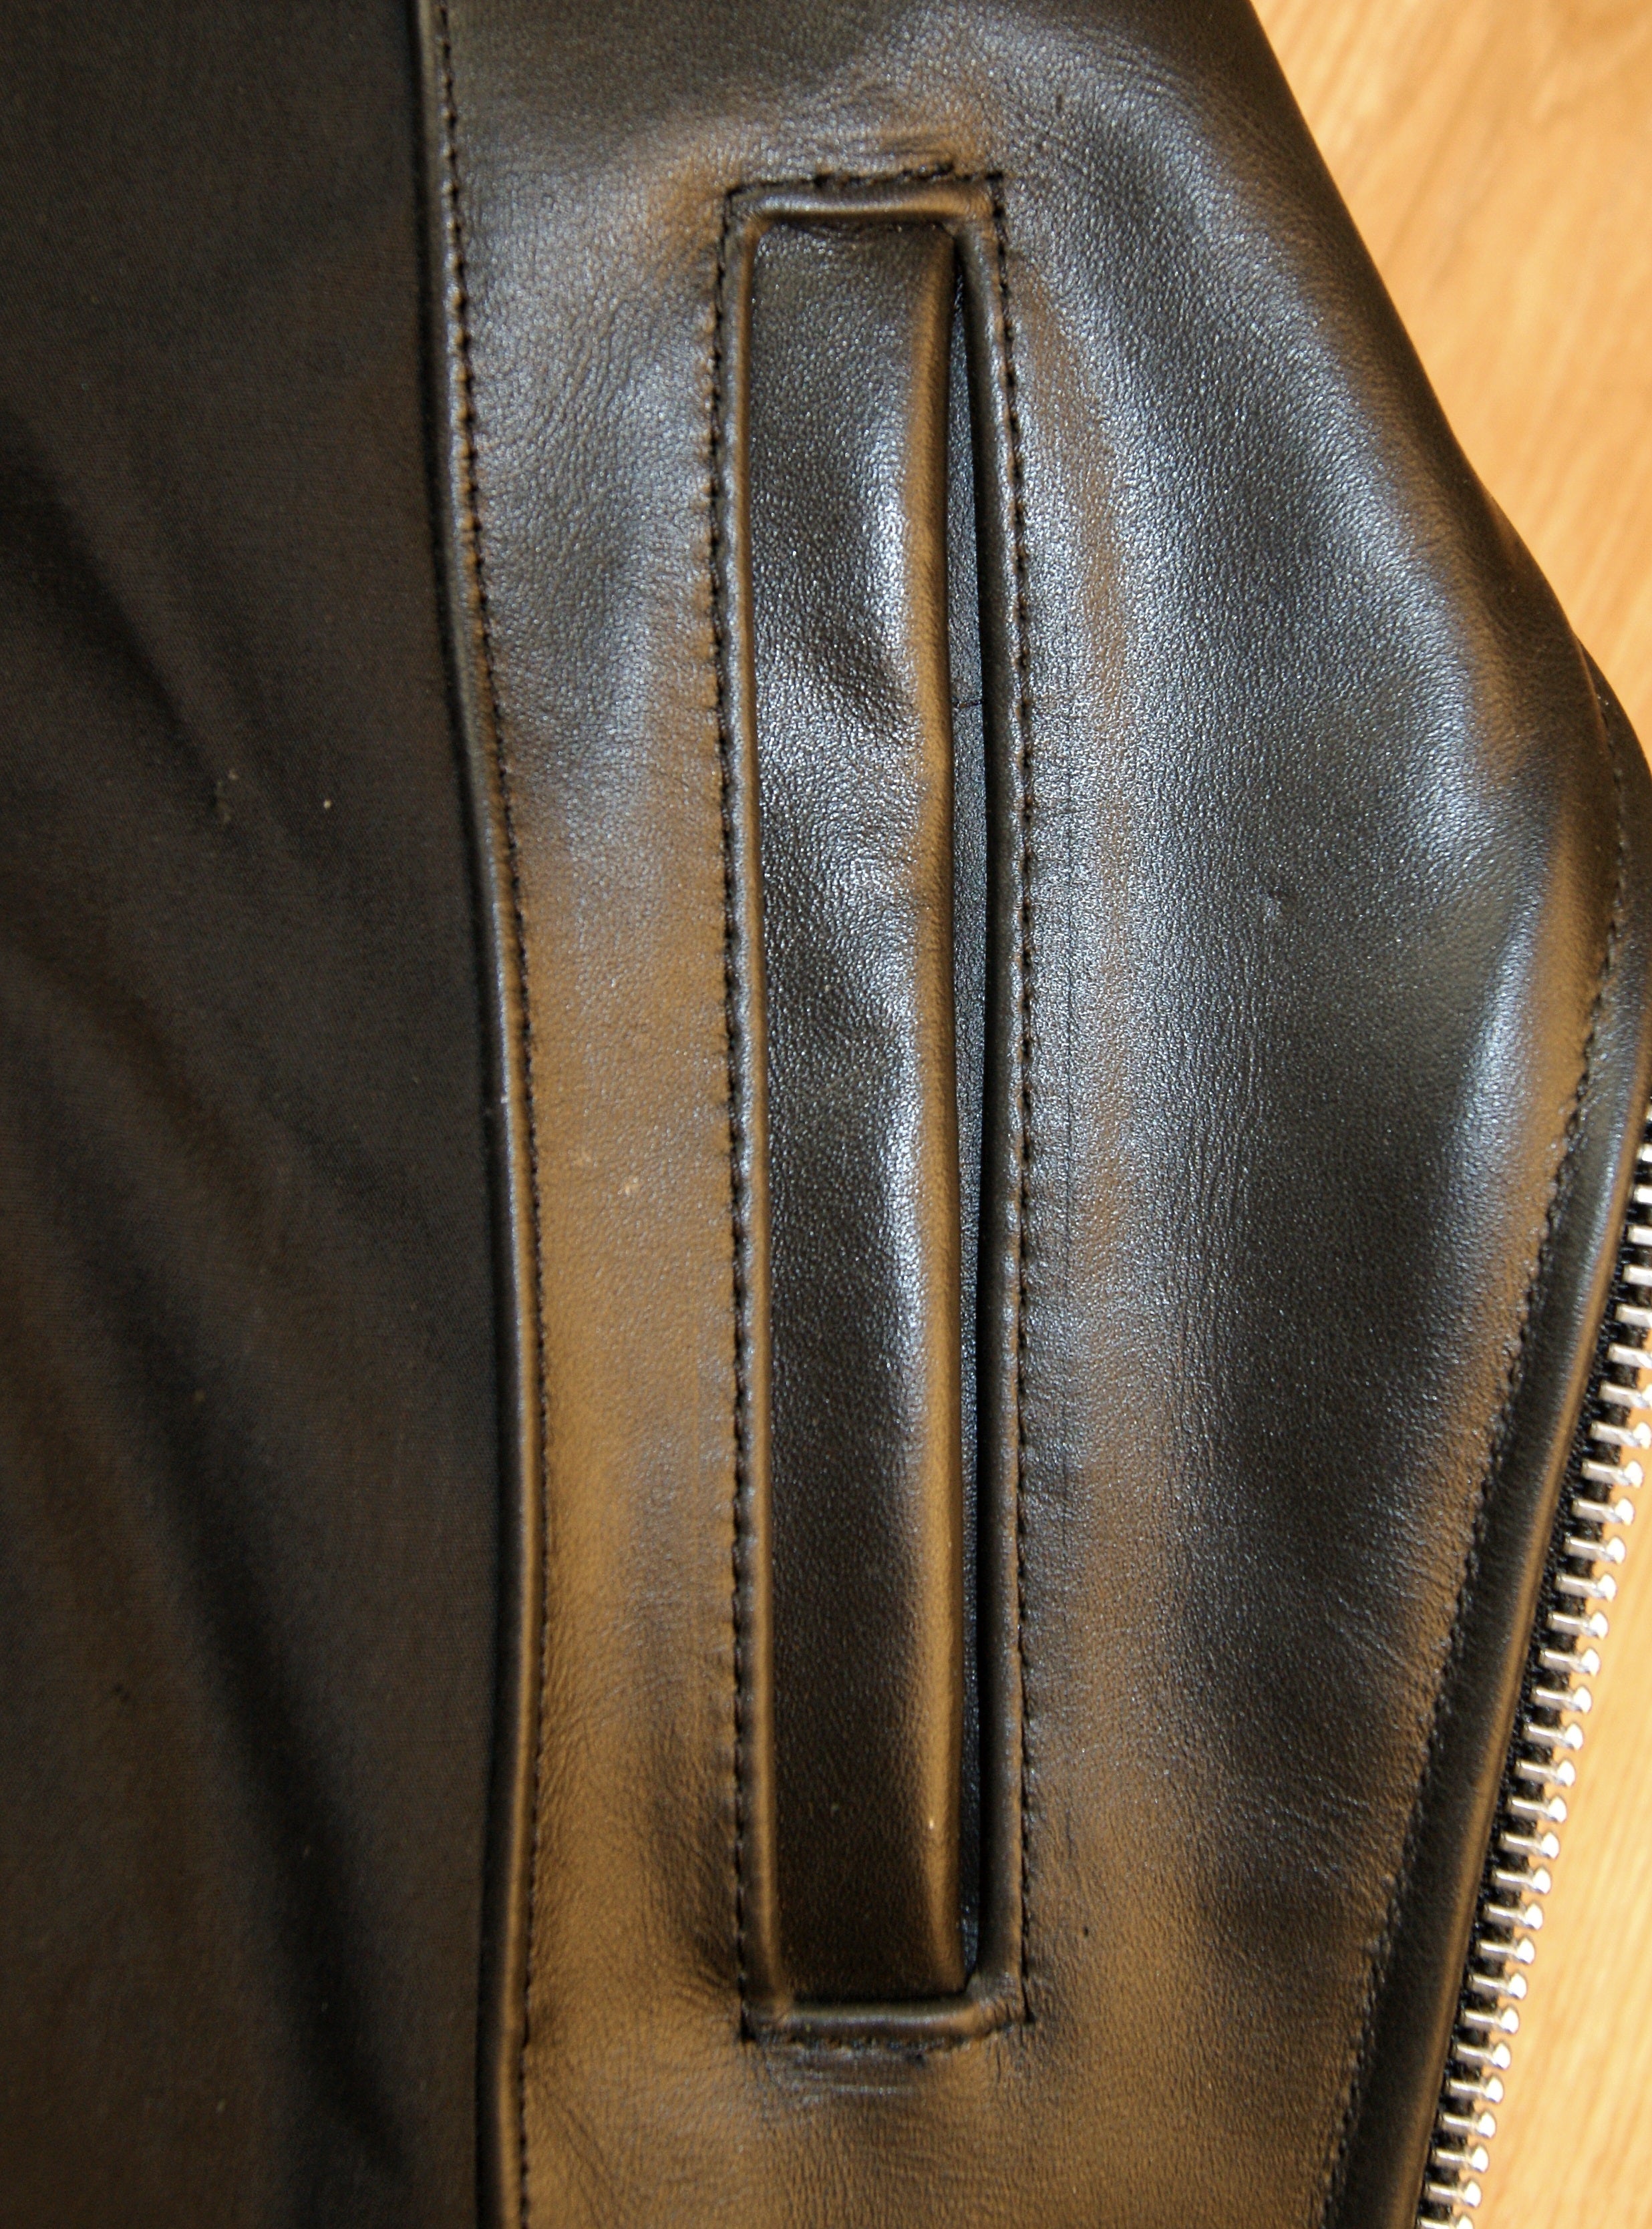 Close-up of left side interior pocket.  Opens vertically with no closure.